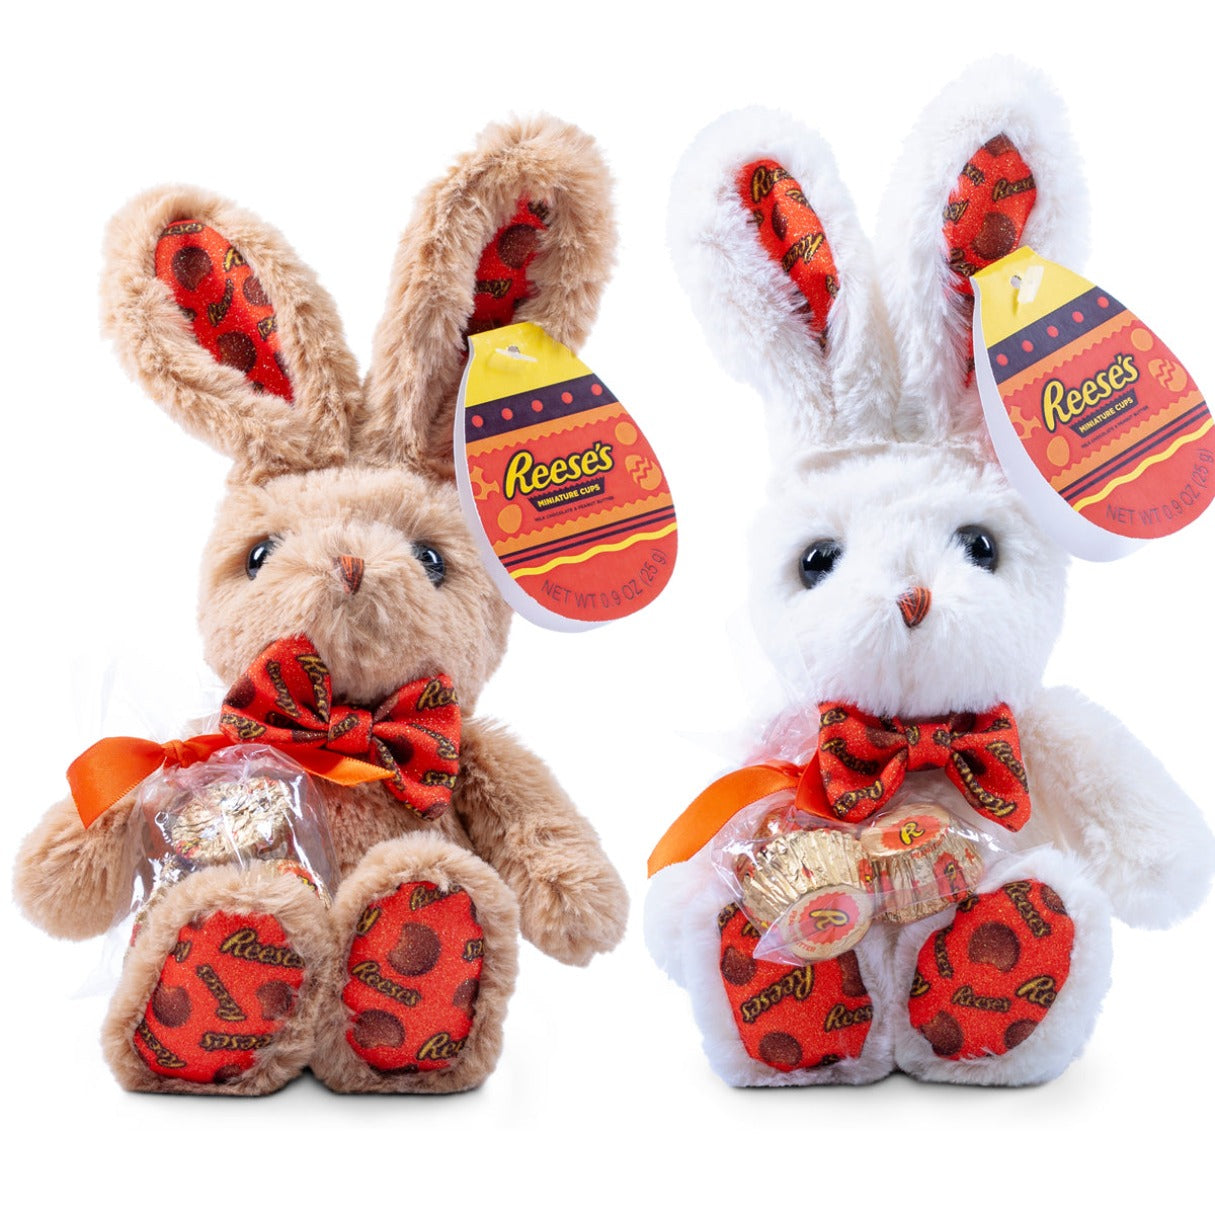 Galerie Reese's Bow Tie Bunny Plush with Chocolate - 6ct